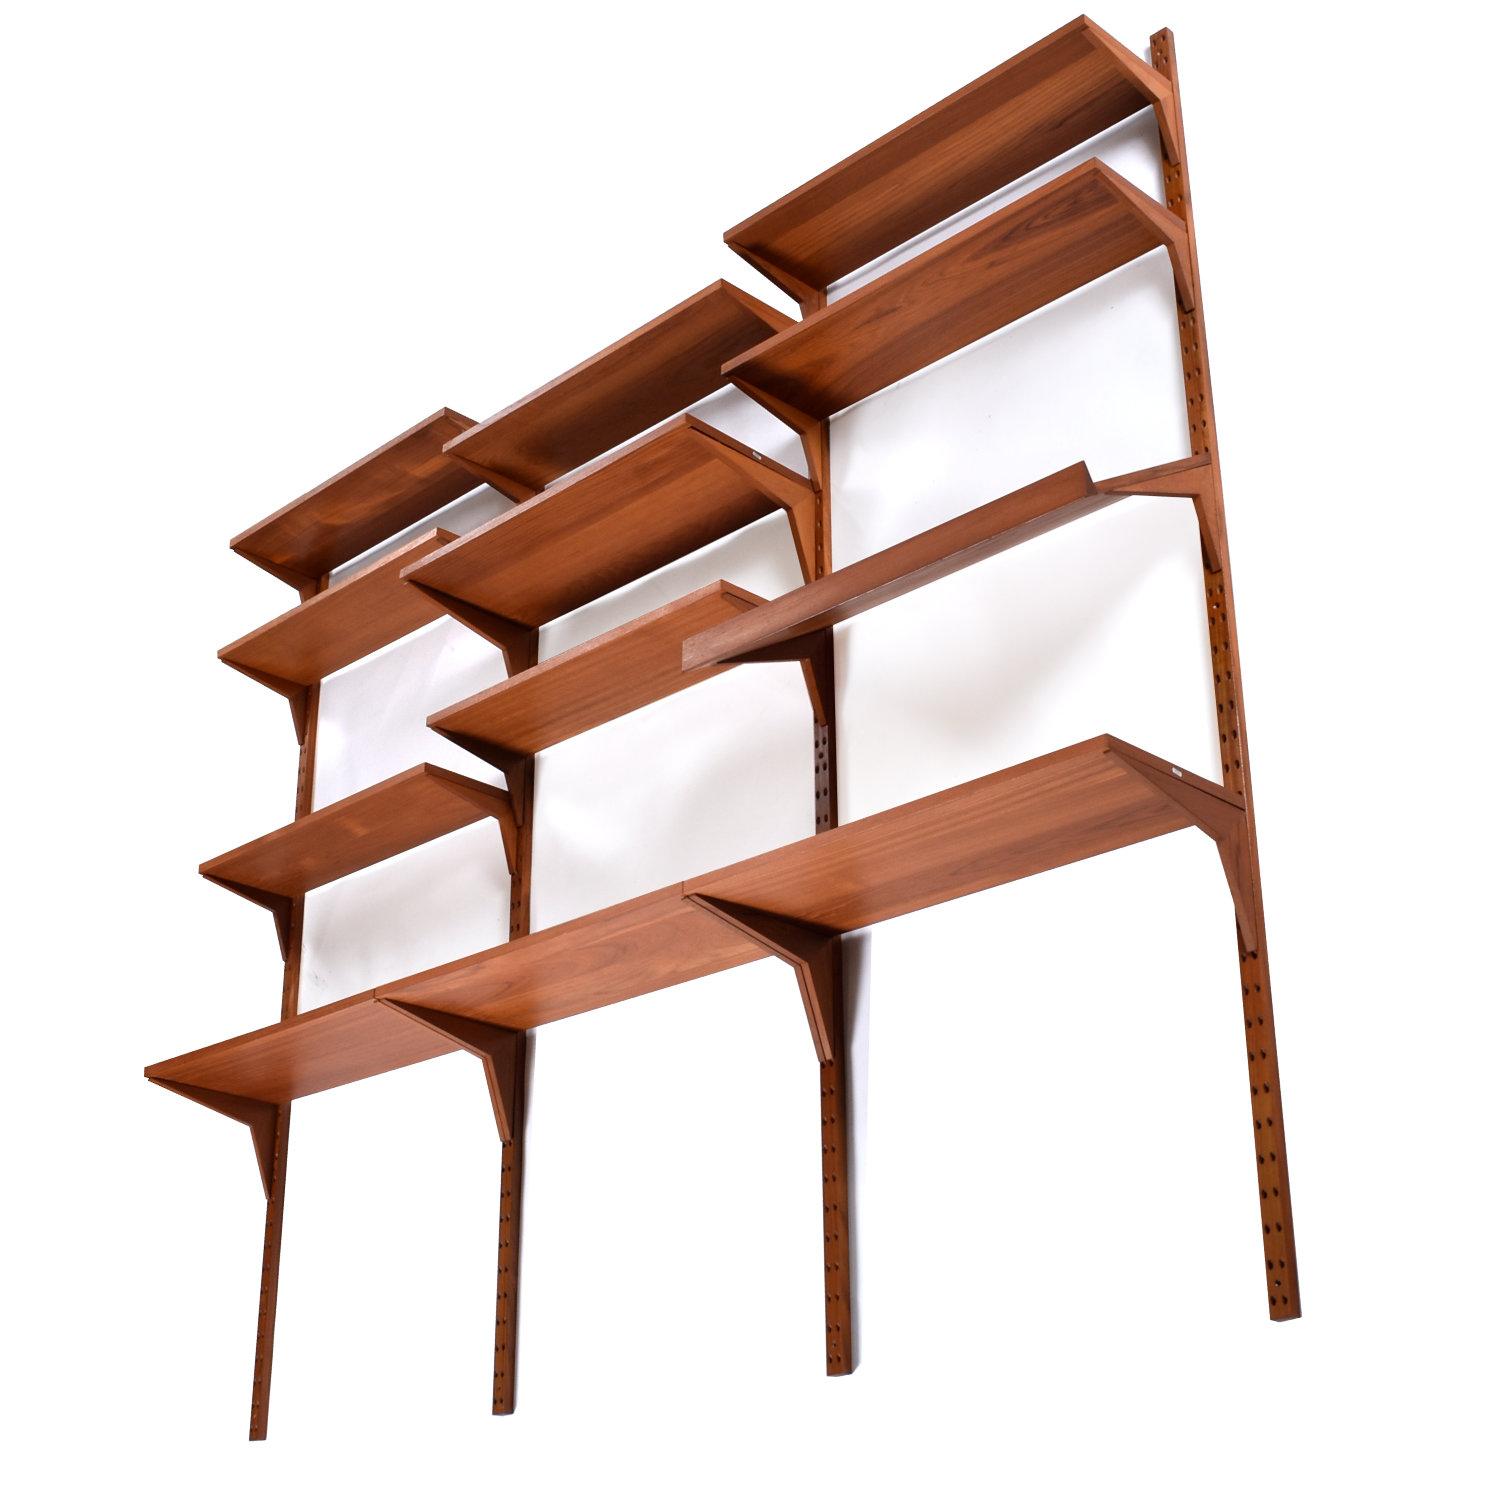 Mid-Century Modern Danish teak wall mounted shelving system designed by Poul Cadovius. The vintage 1960s Danish teak CADO wall mounted shelves come in a 3-bay configuration. The system is modular. The ingenious design allows one to easily customize